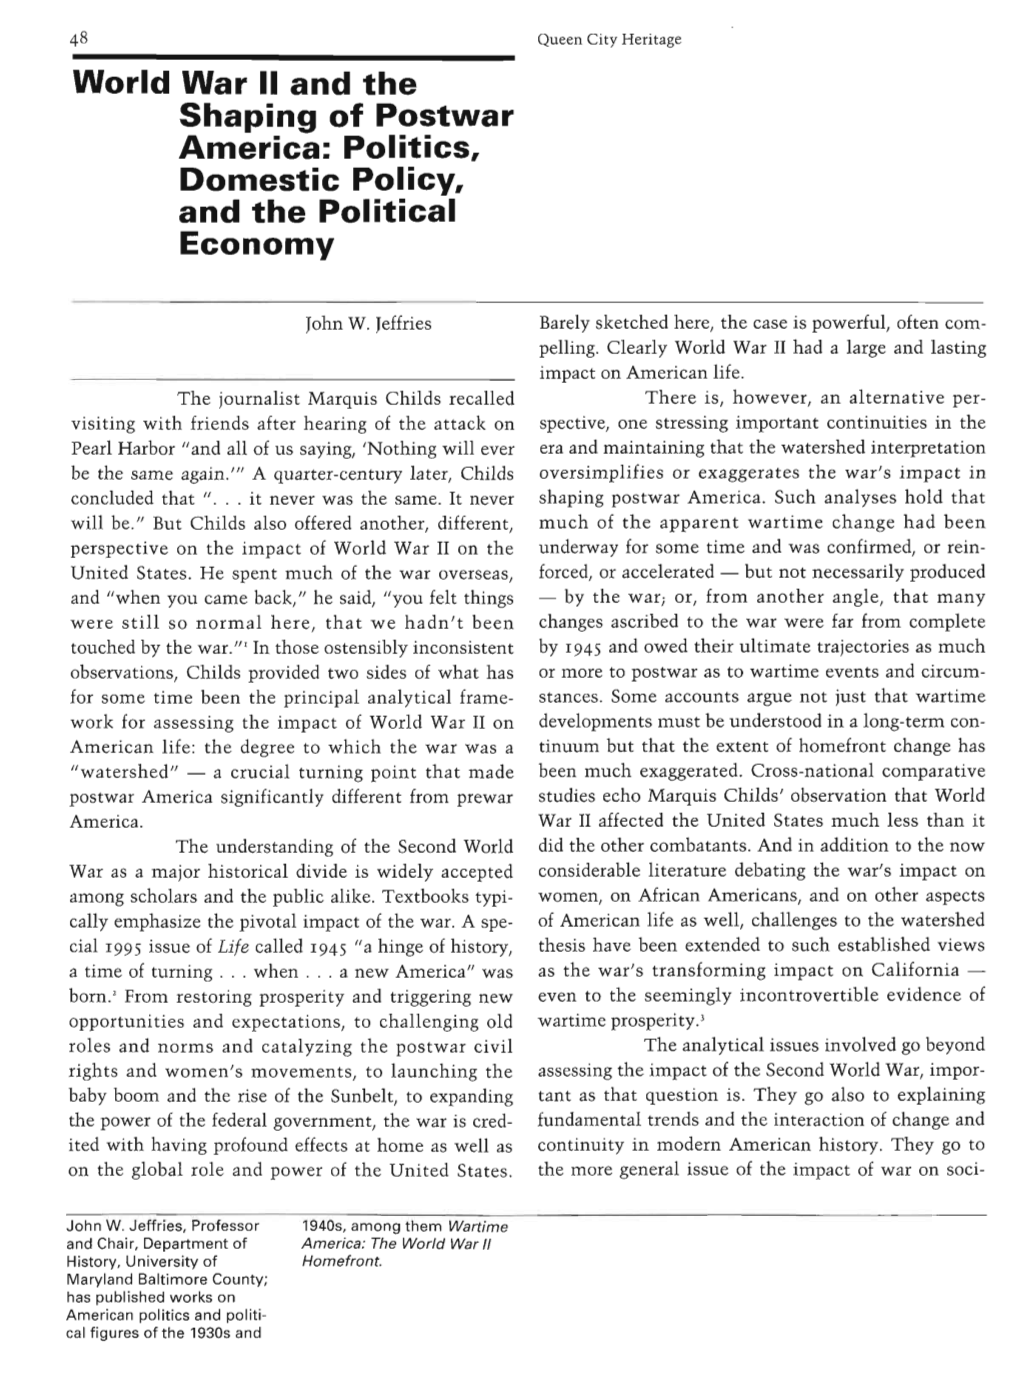 World War II and the Shaping of Postwar America: Politics, Domestic Policy, and the Political Economy